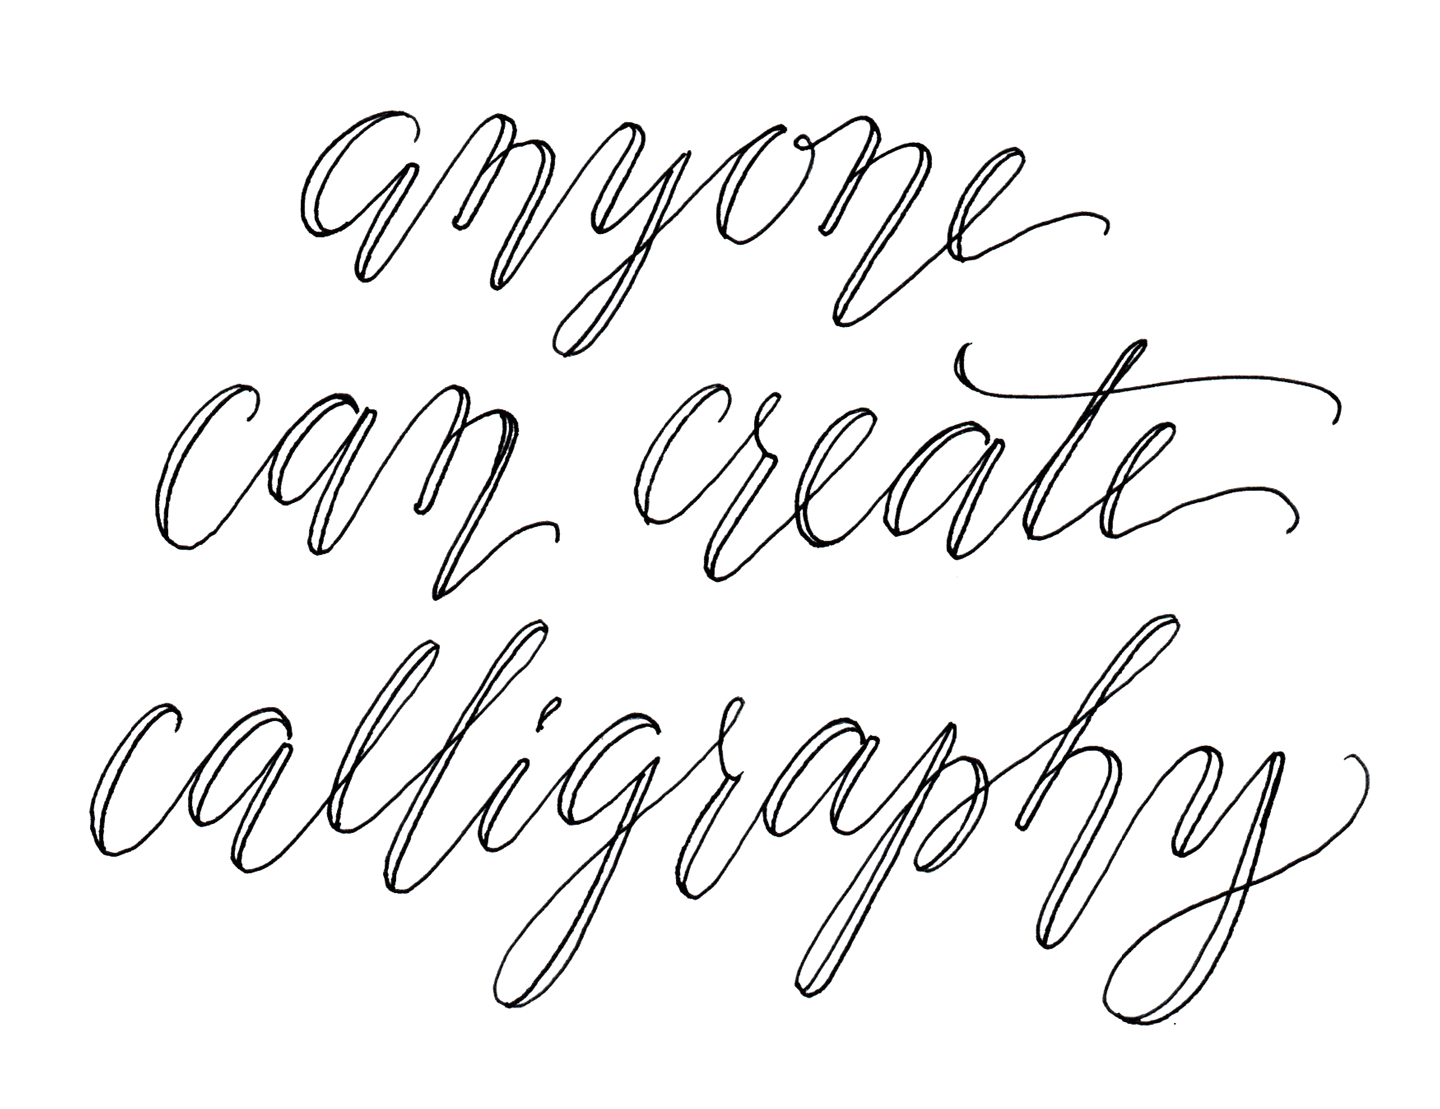 Cheating Calligraphy